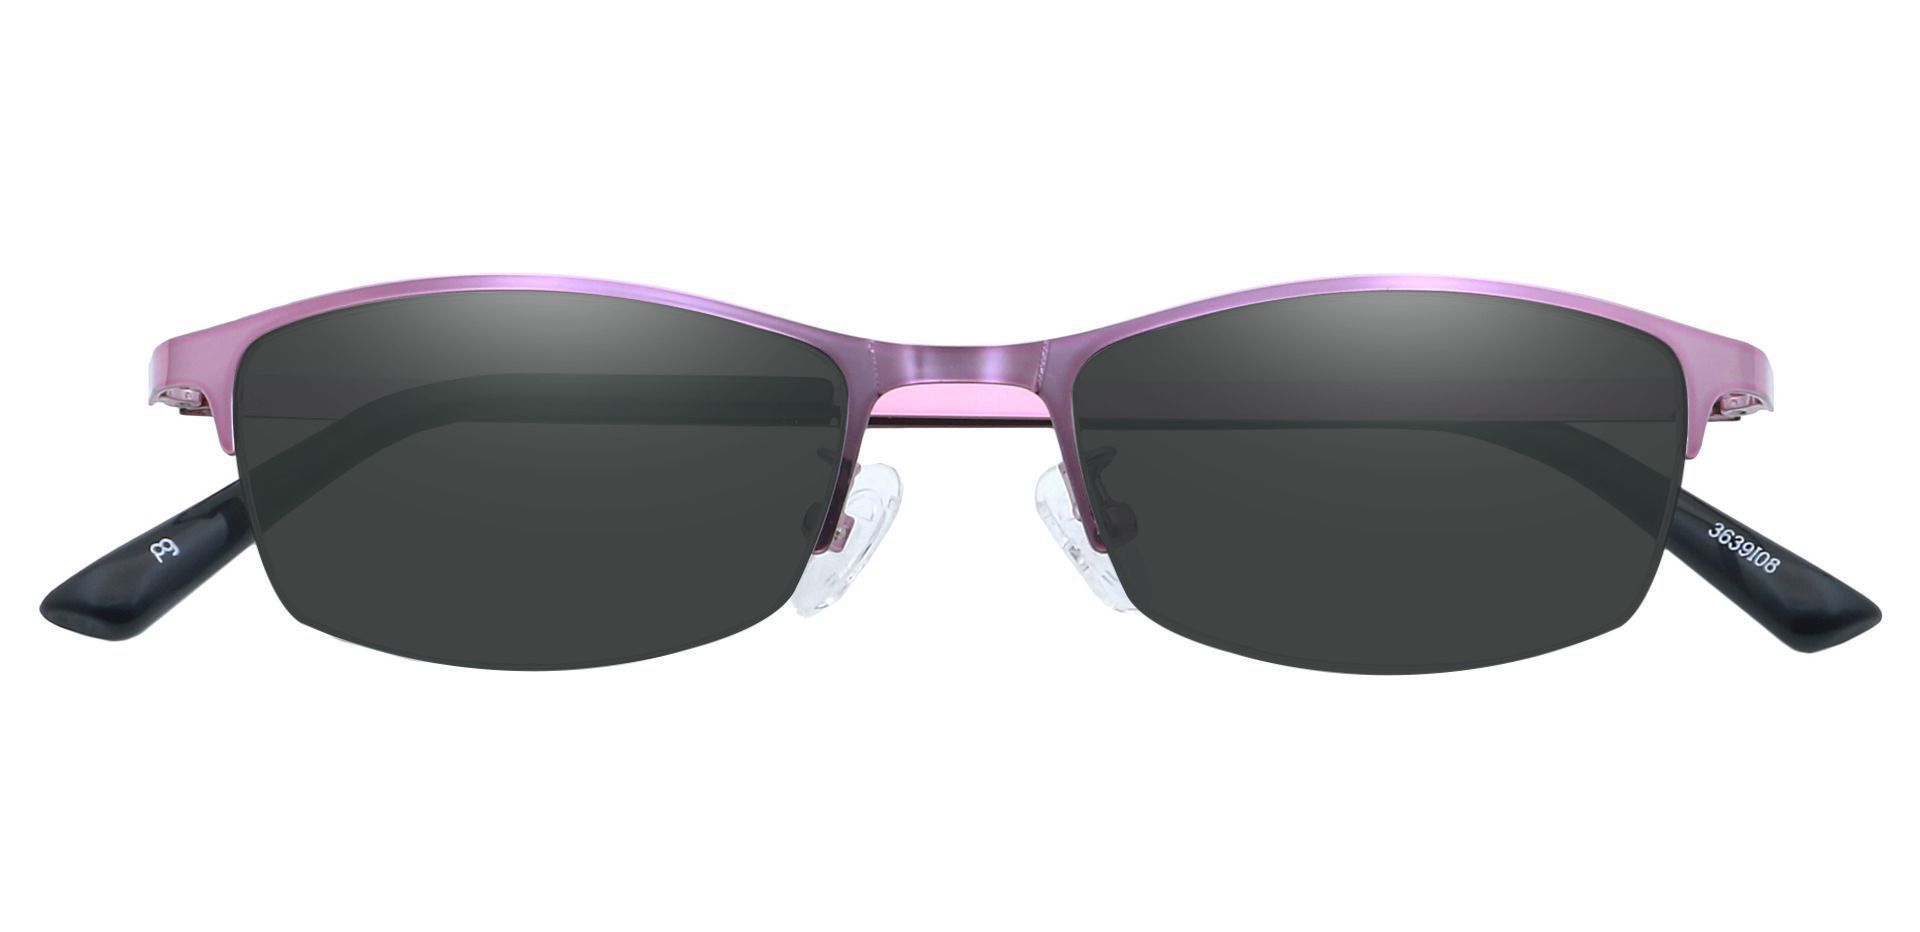 Eliza Rectangle Non-Rx Sunglasses -  Pink Frame With Gray Lenses